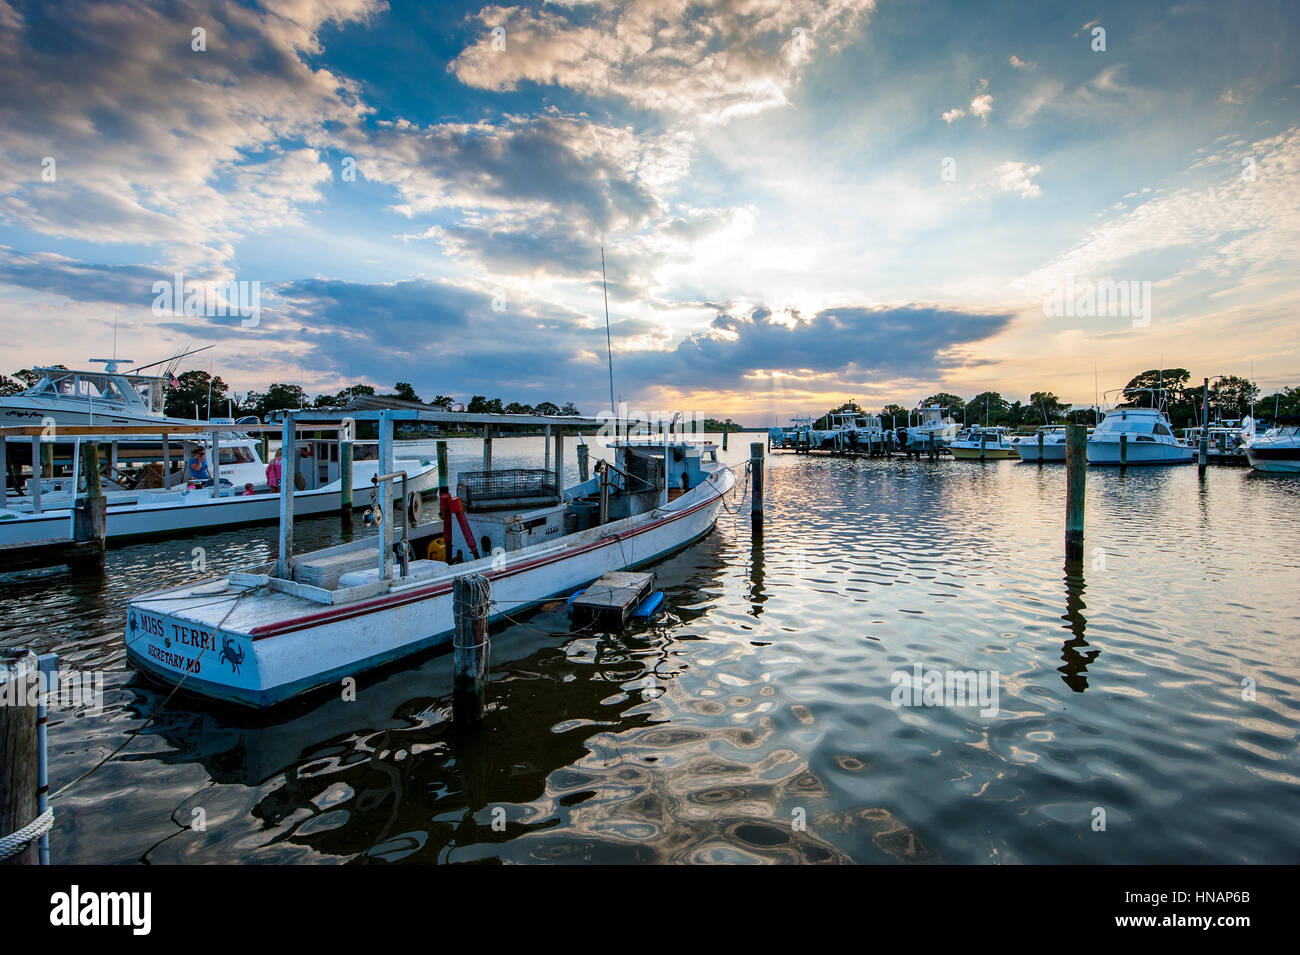 Some crabbing boats are docked in close proximity to the Suicide Bridge located in Secretary, Maryland. Stock Photo